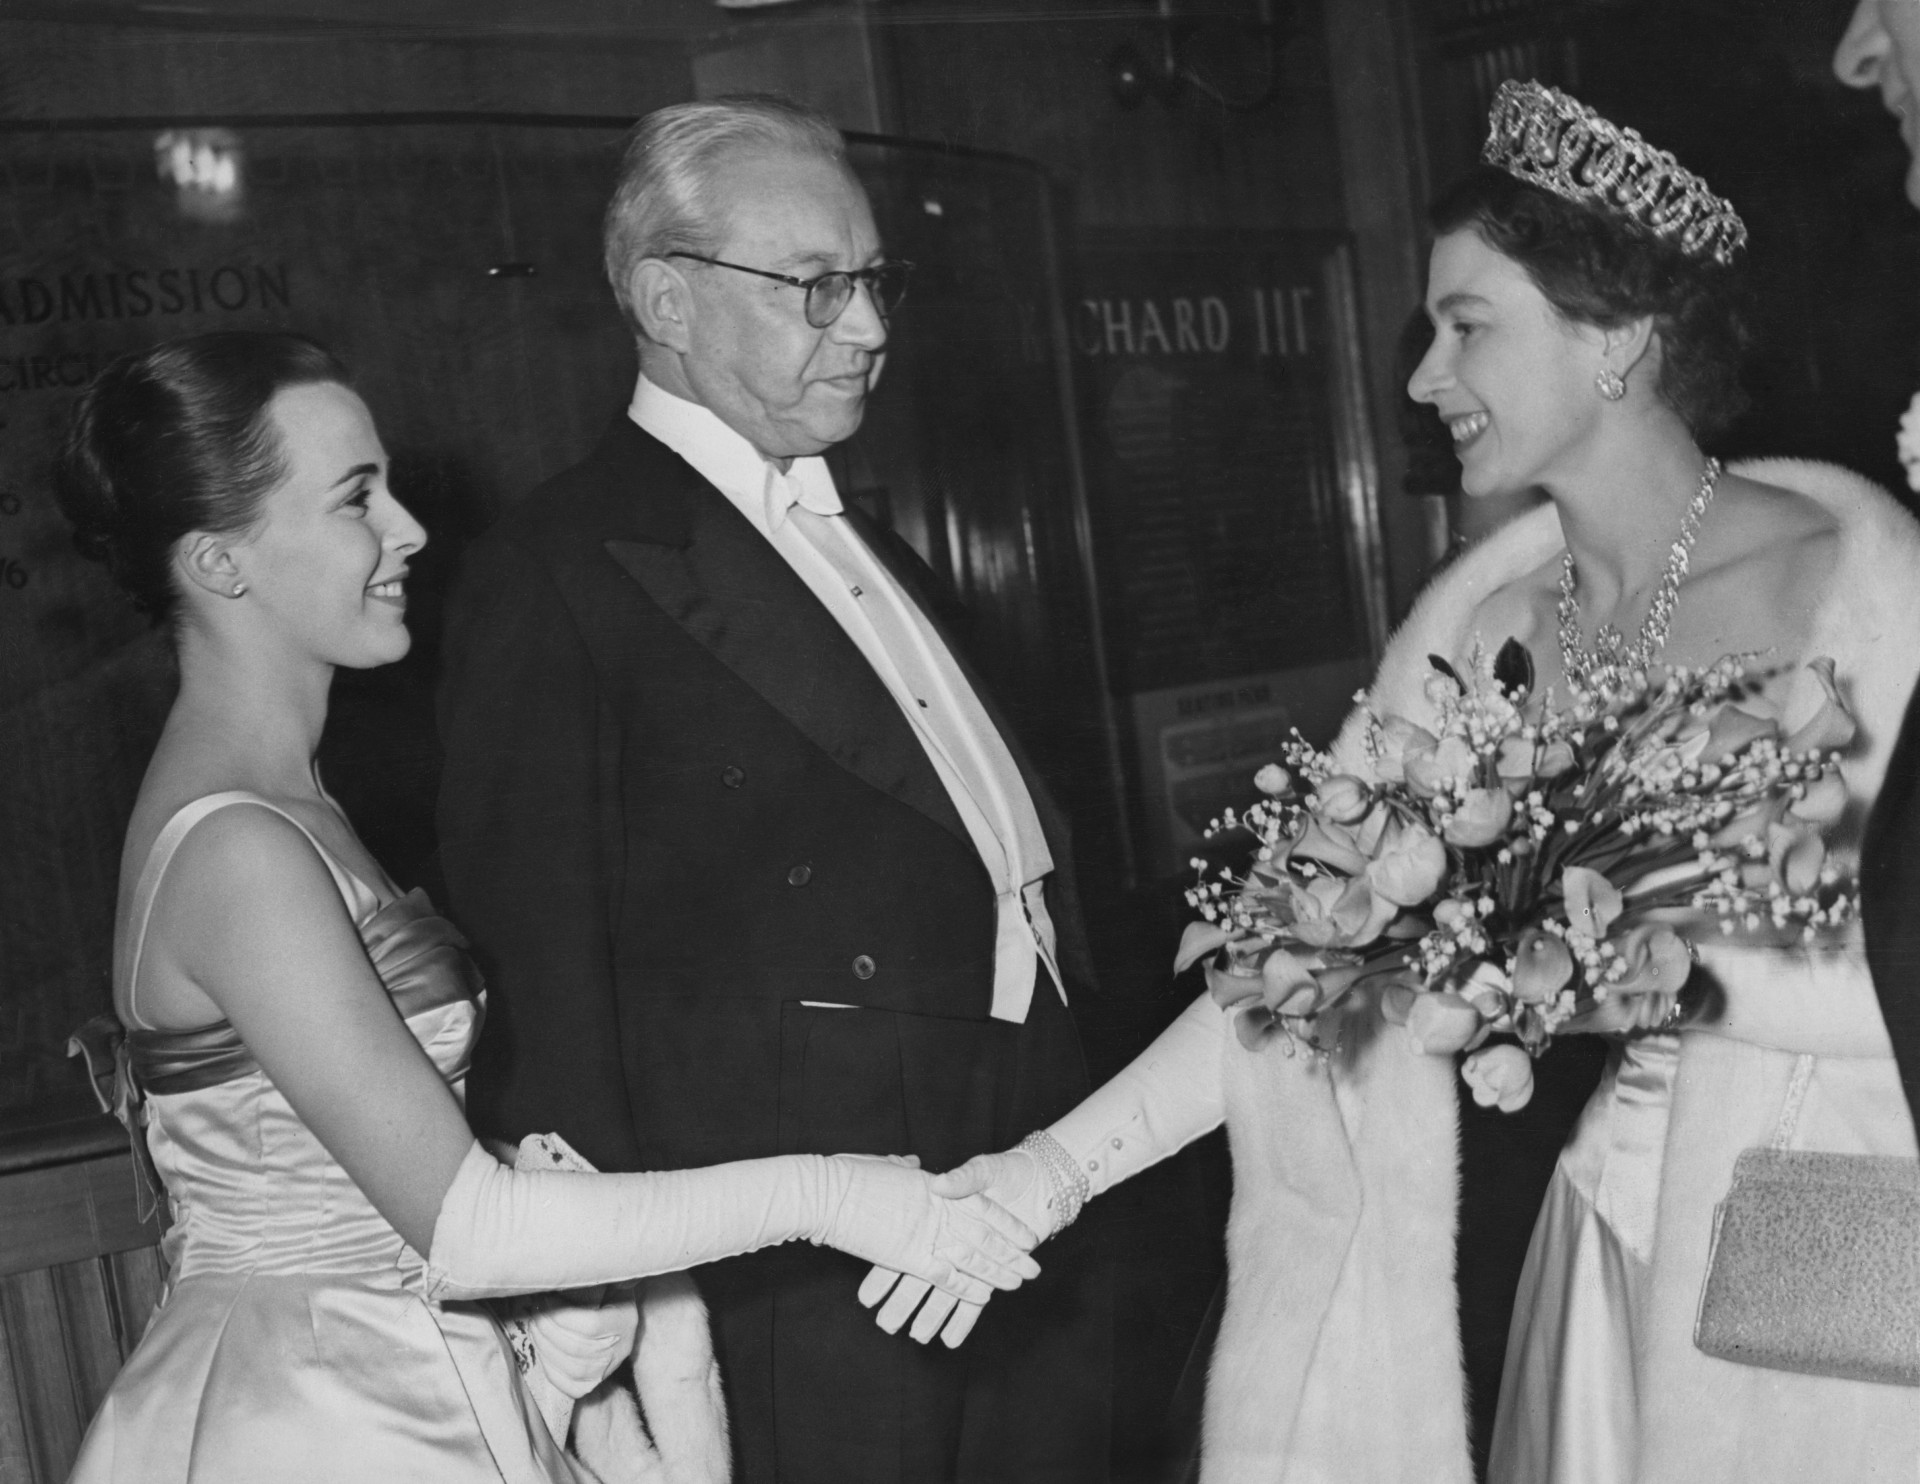 Queen Elizabeth meets actress Claire Bloom and producer Sir Alexander Korda.<p>You may also like:<a href="https://www.starsinsider.com/n/484349?utm_source=msn.com&utm_medium=display&utm_campaign=referral_description&utm_content=203154v10en-au"> Who died in Buckingham Palace?</a></p>